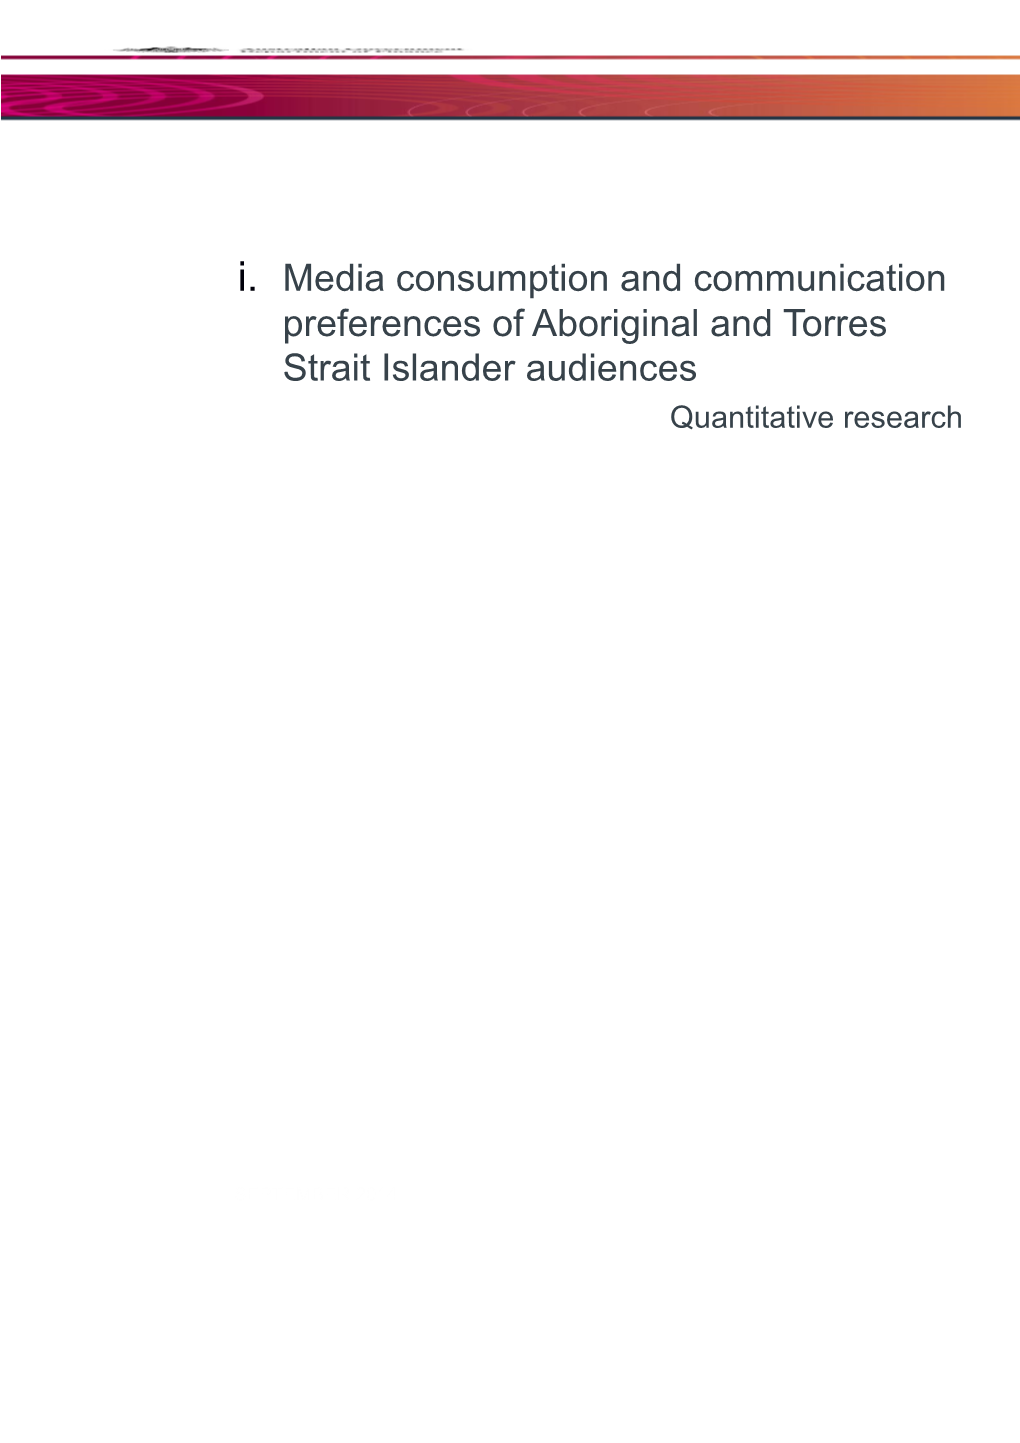 Media Consumption and Communication Preferences of Aboriginal and Torres Strait Islander